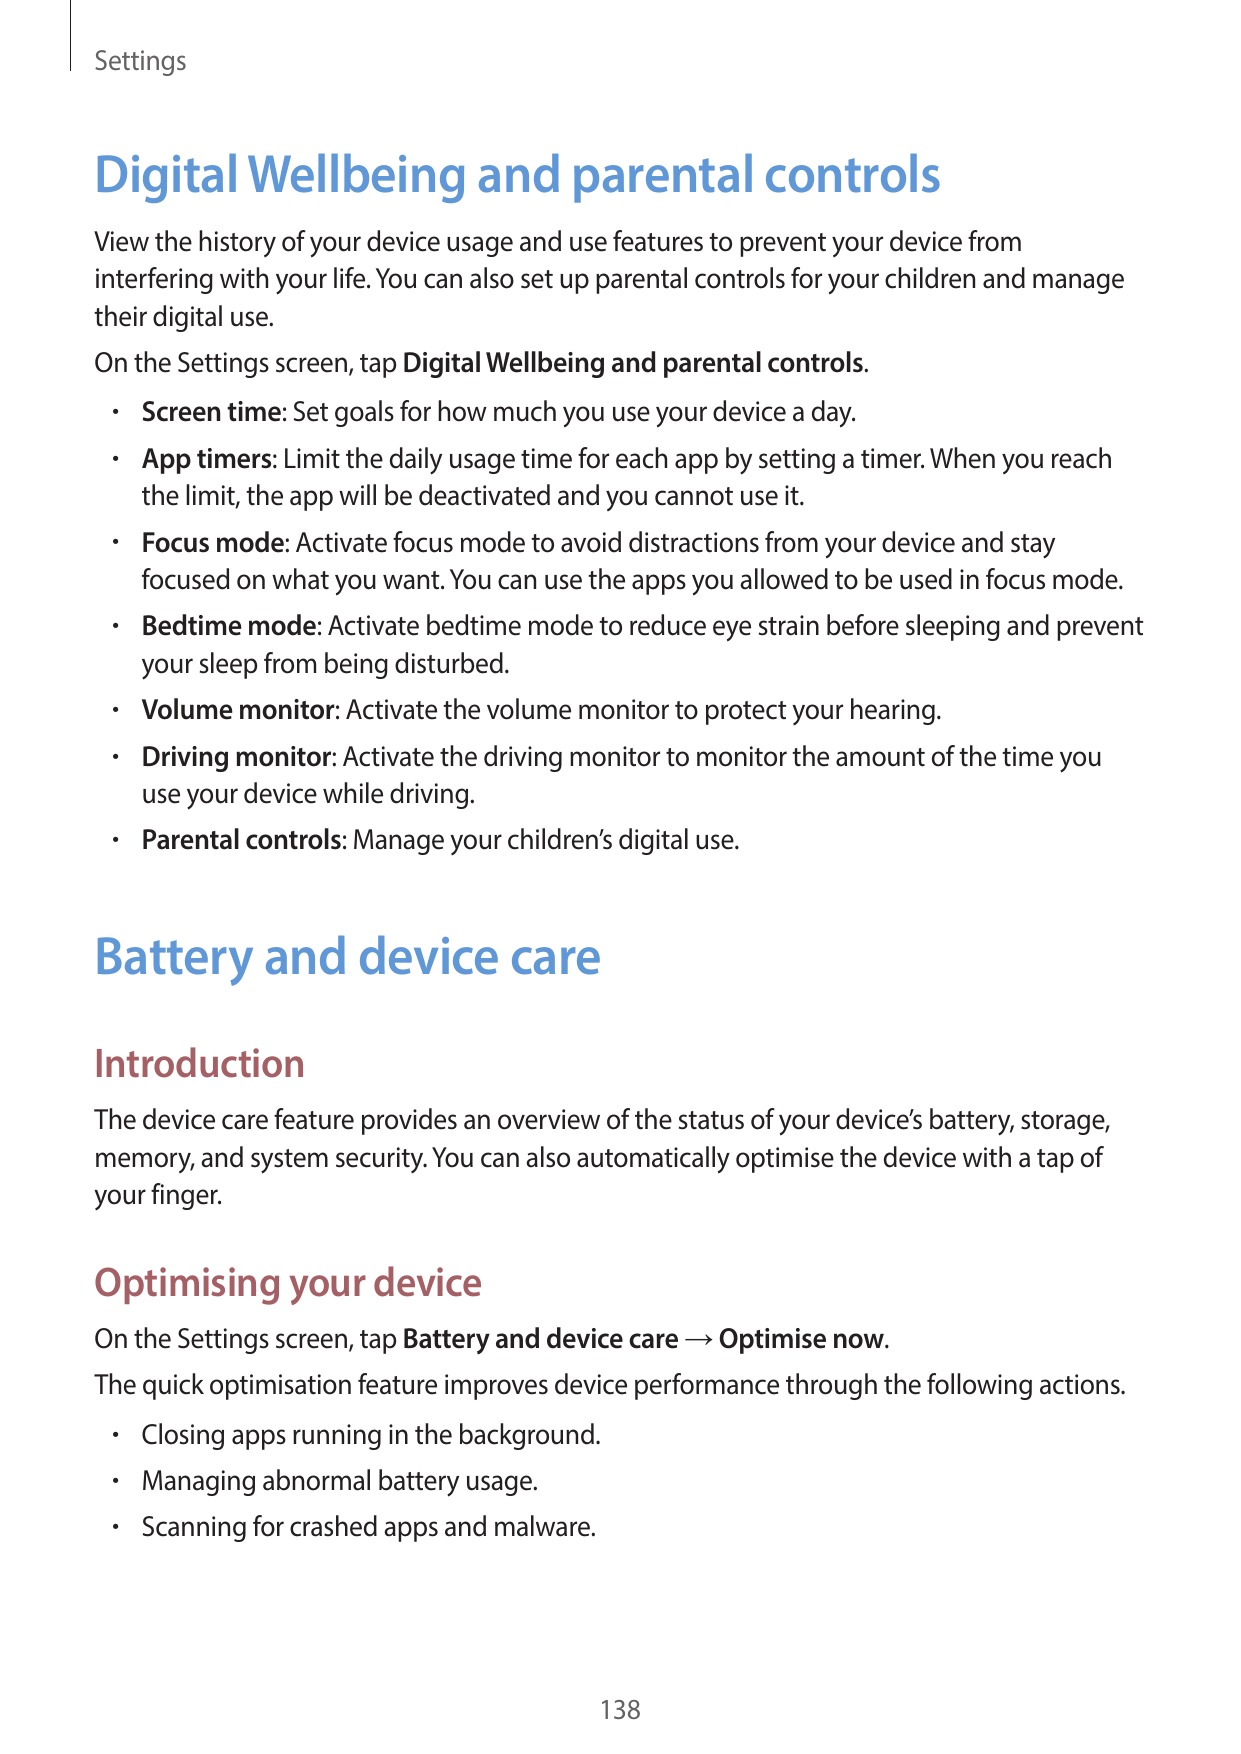 SettingsDigital Wellbeing and parental controlsView the history of your device usage and use features to prevent your device fro